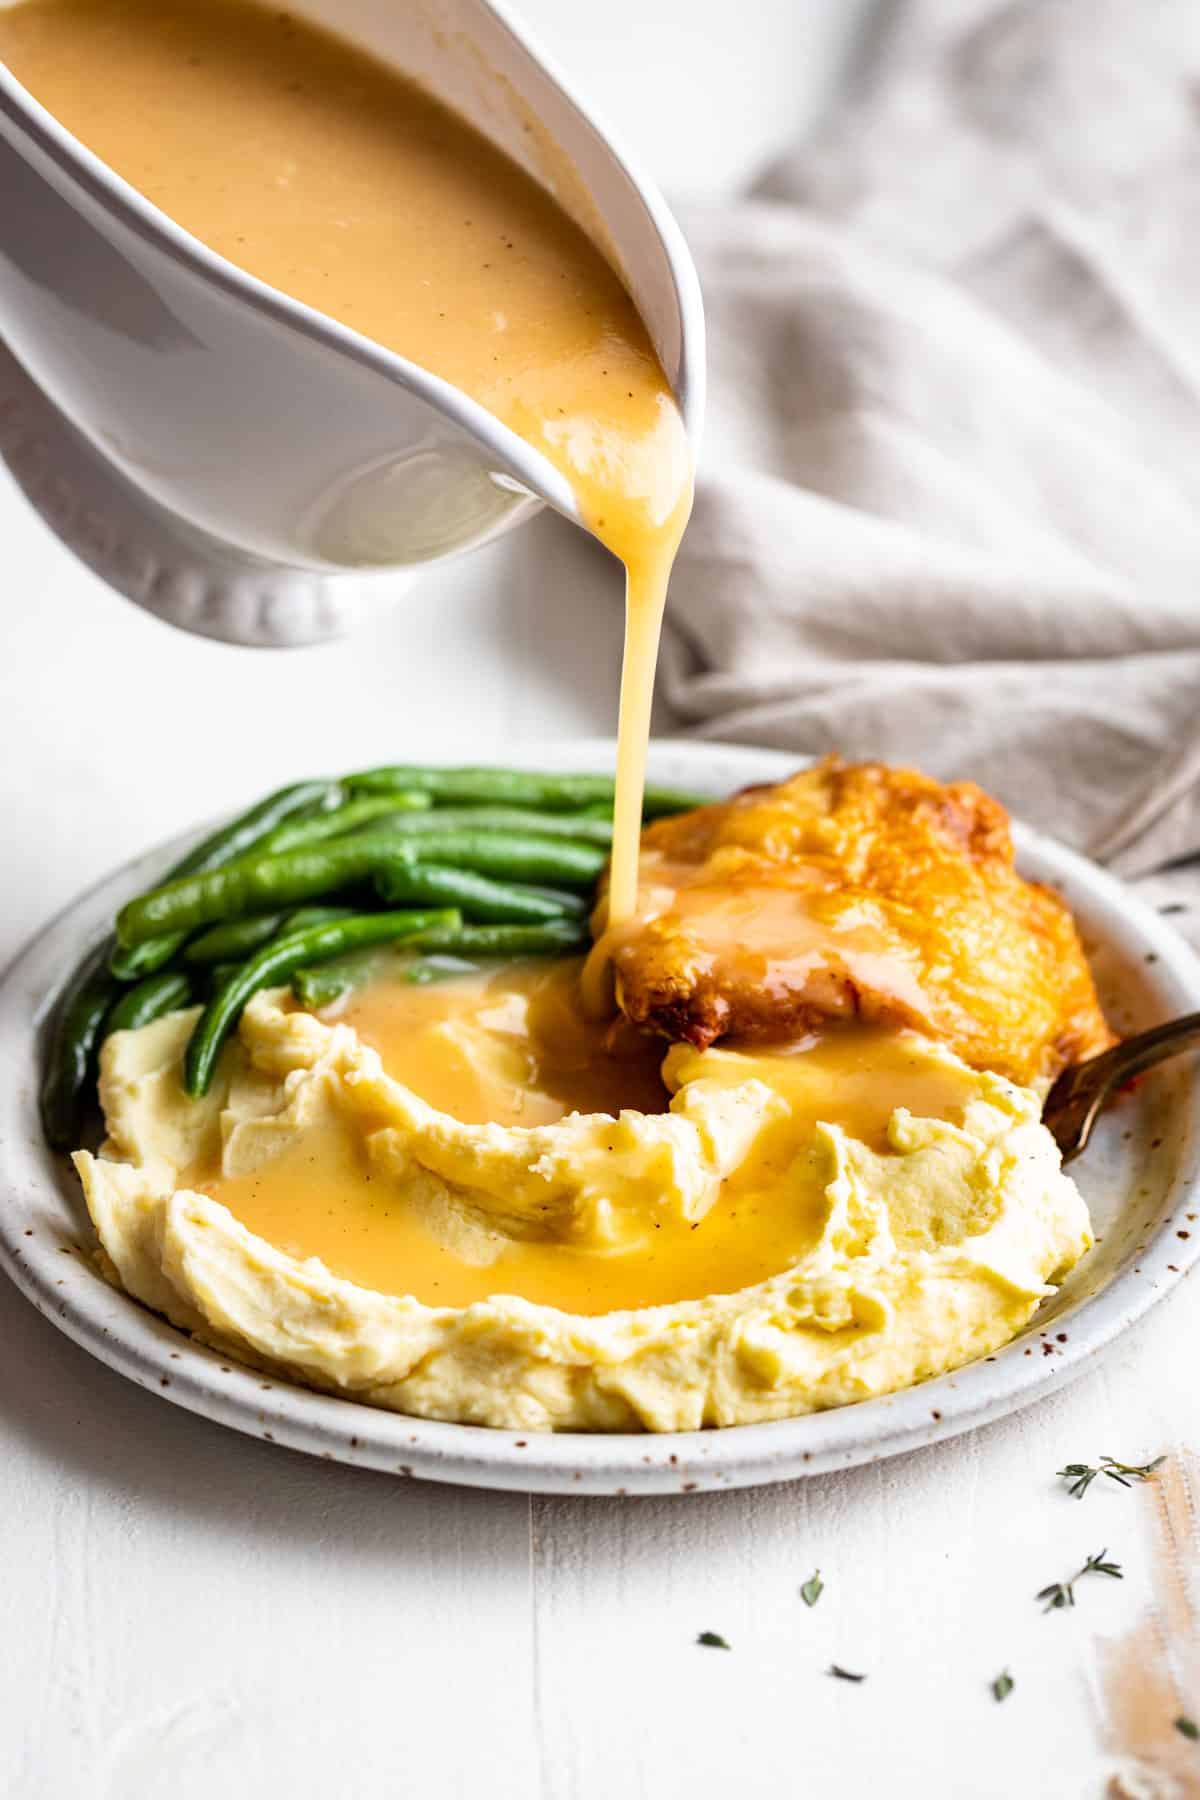 Gravy being poured out of a gravy boat onto mashed potatoes with green beans and chicken in the background.